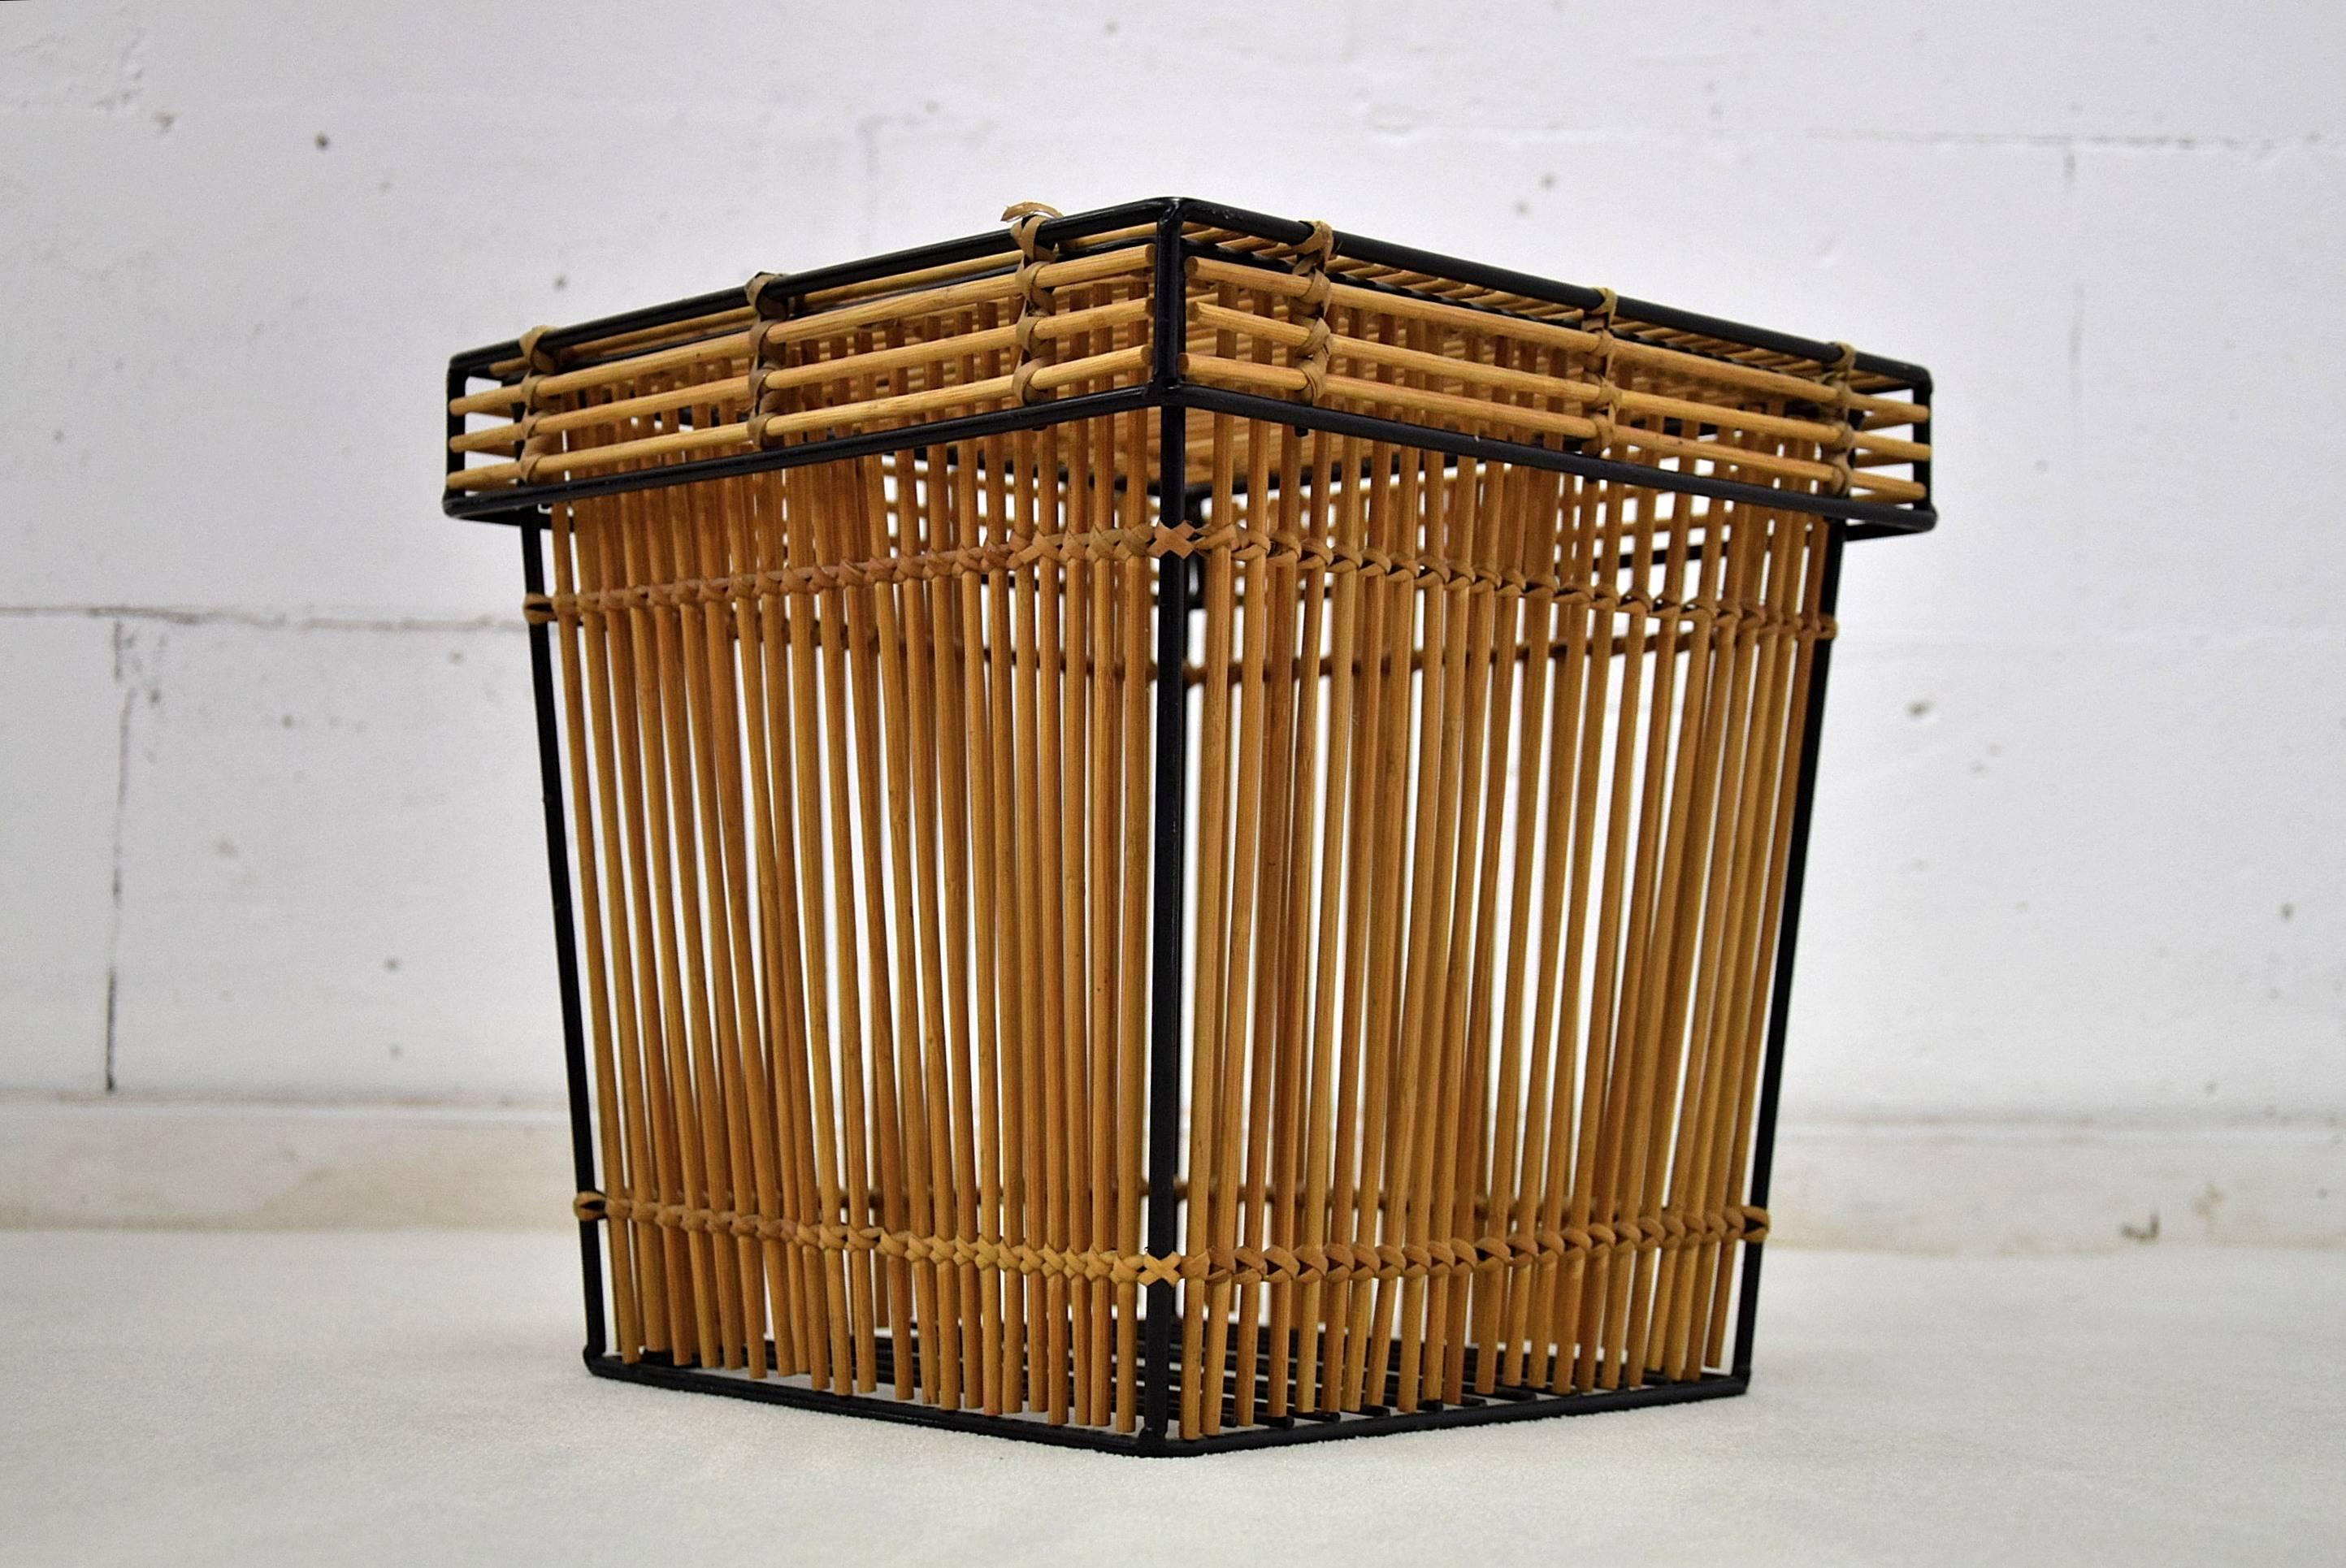 Steel and wicker Mid century modern baskets
Beautiful and decorative baskets produced by Rohe, Noordwolde, the Netherlands in the 1960s.

The baskets are in great condition. One of them, image number 5, misses one of the steel rods at the